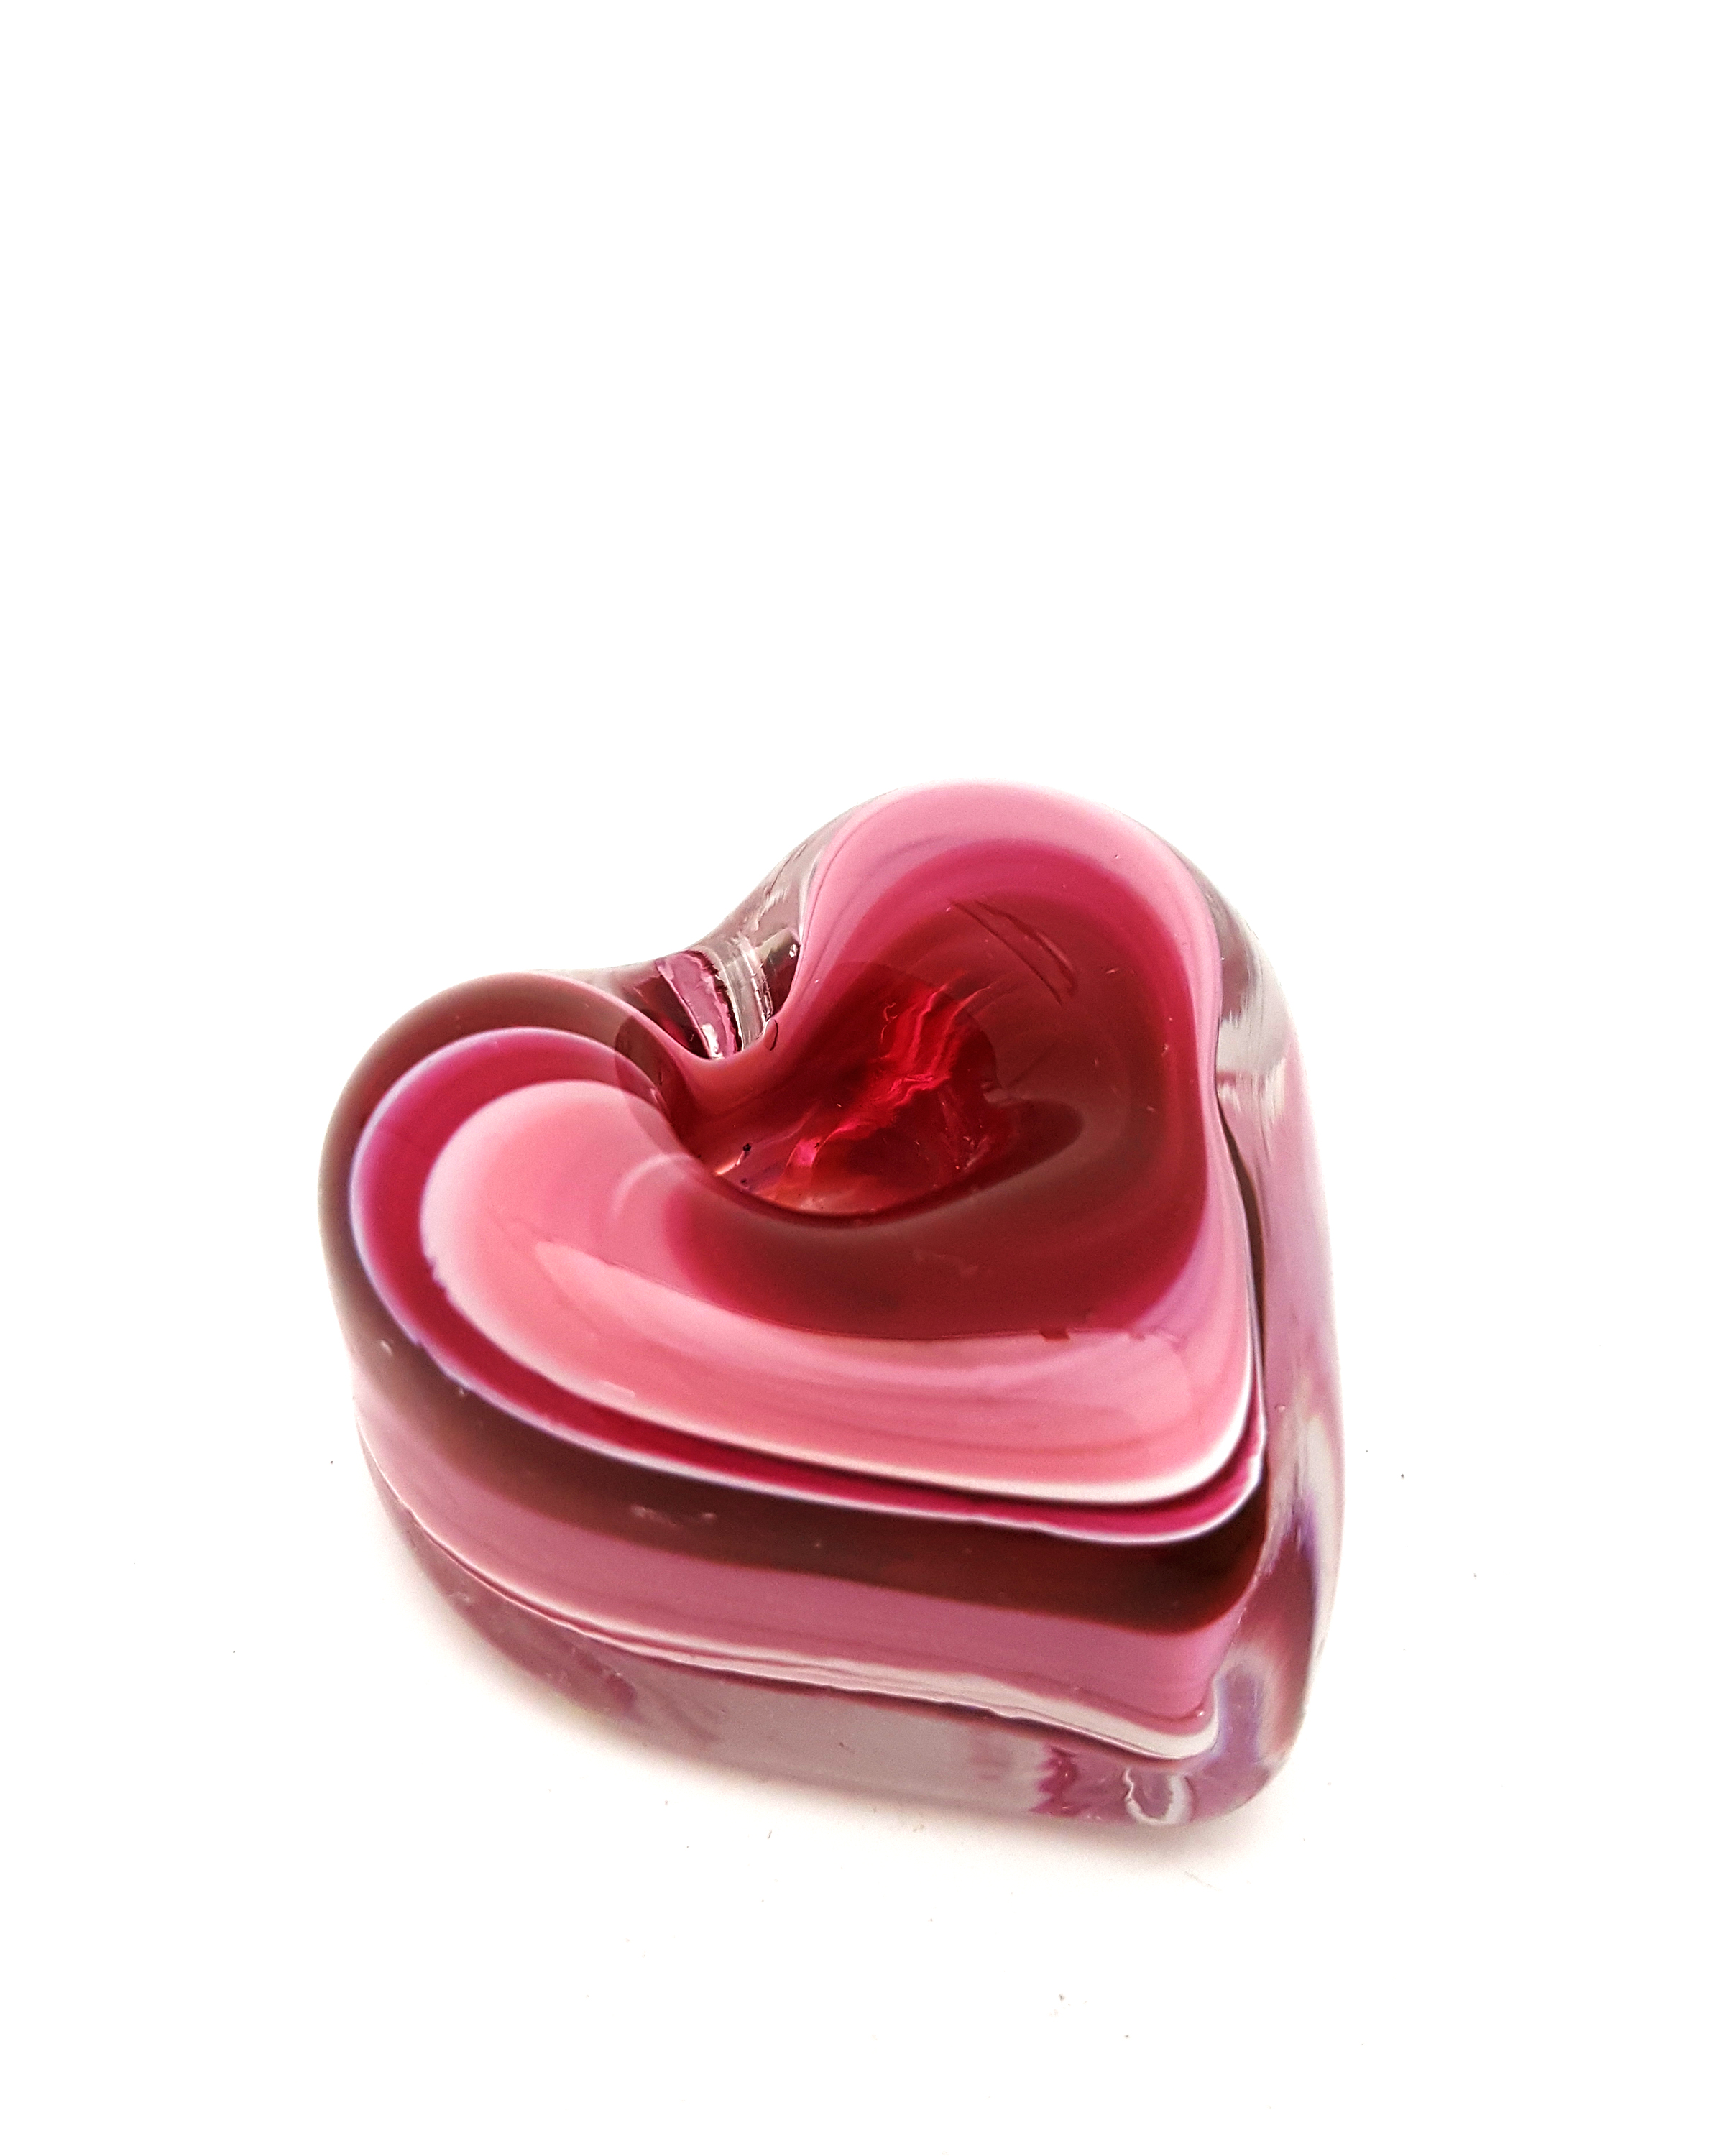 Heart shaped candle holder - Valletta Glass